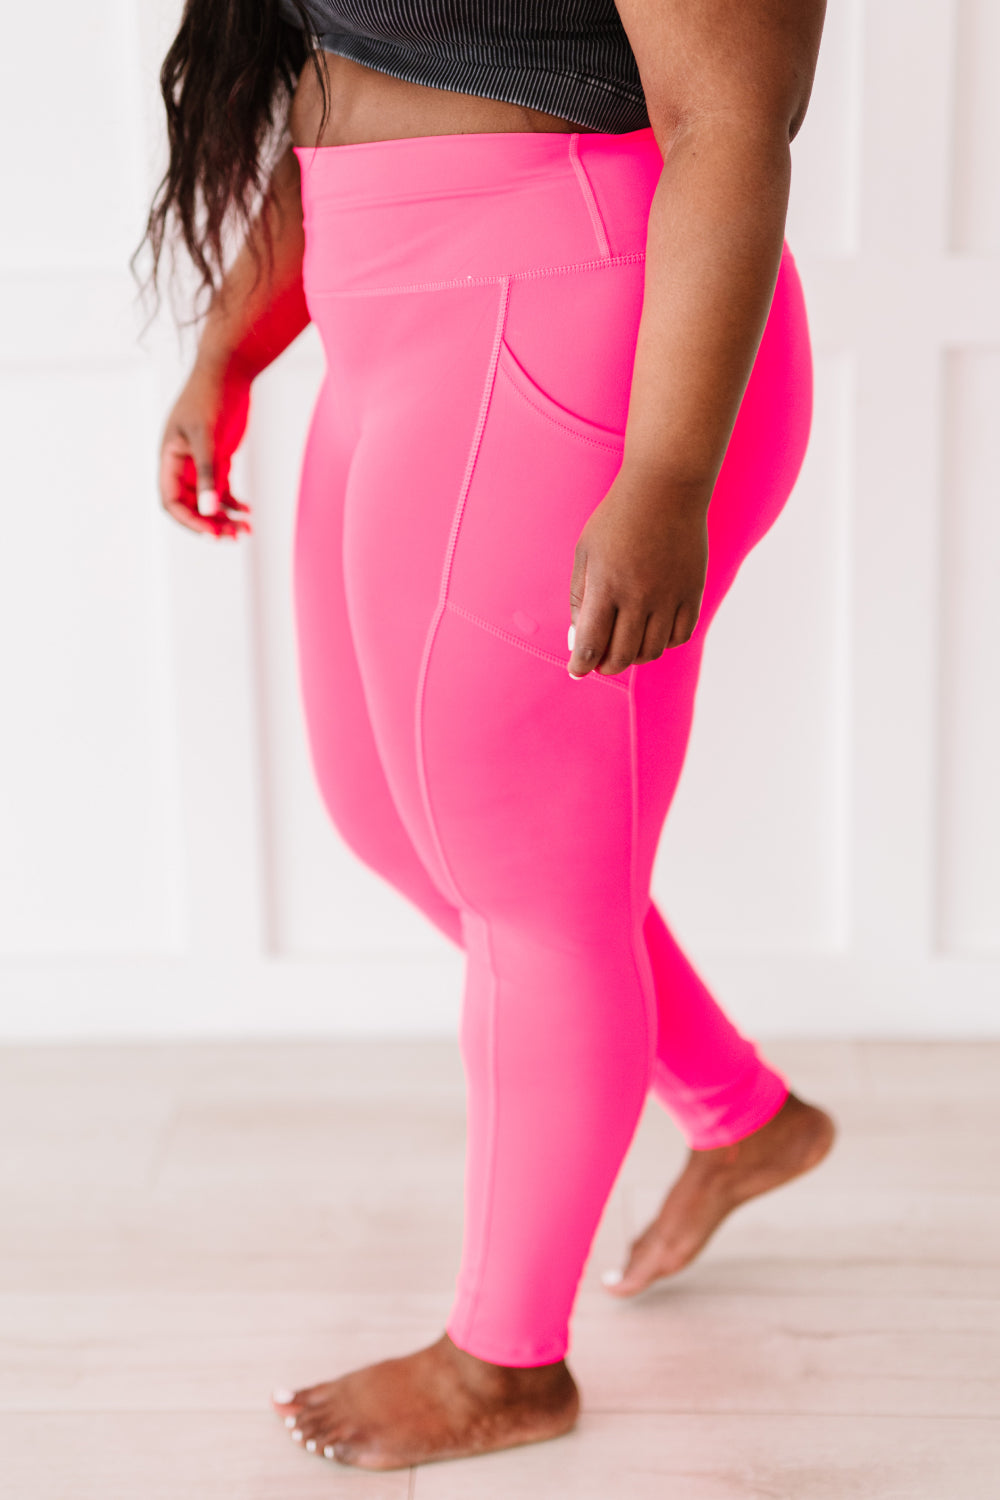 Step Aside Athletic Leggings in Neon Coral Fuchsia